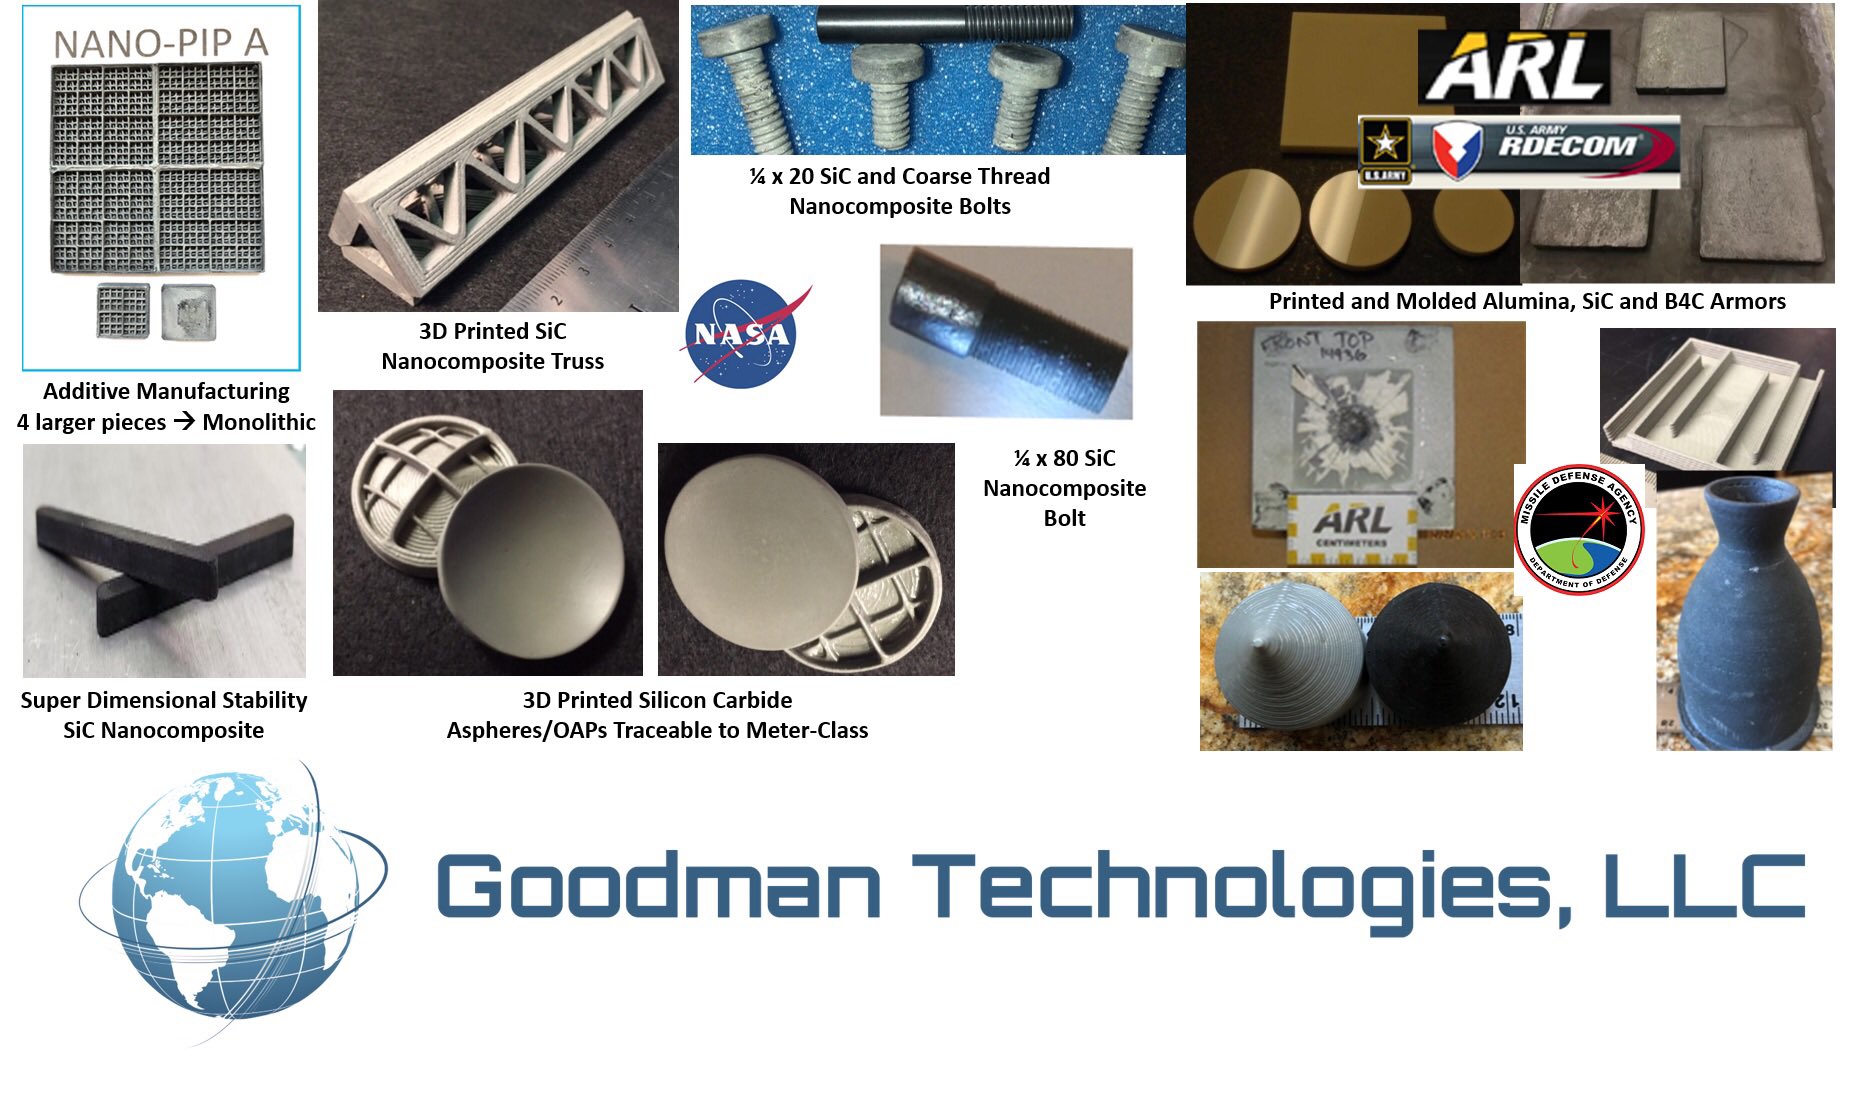 Examples of 3D printed parts for space by Goodman Technologies.